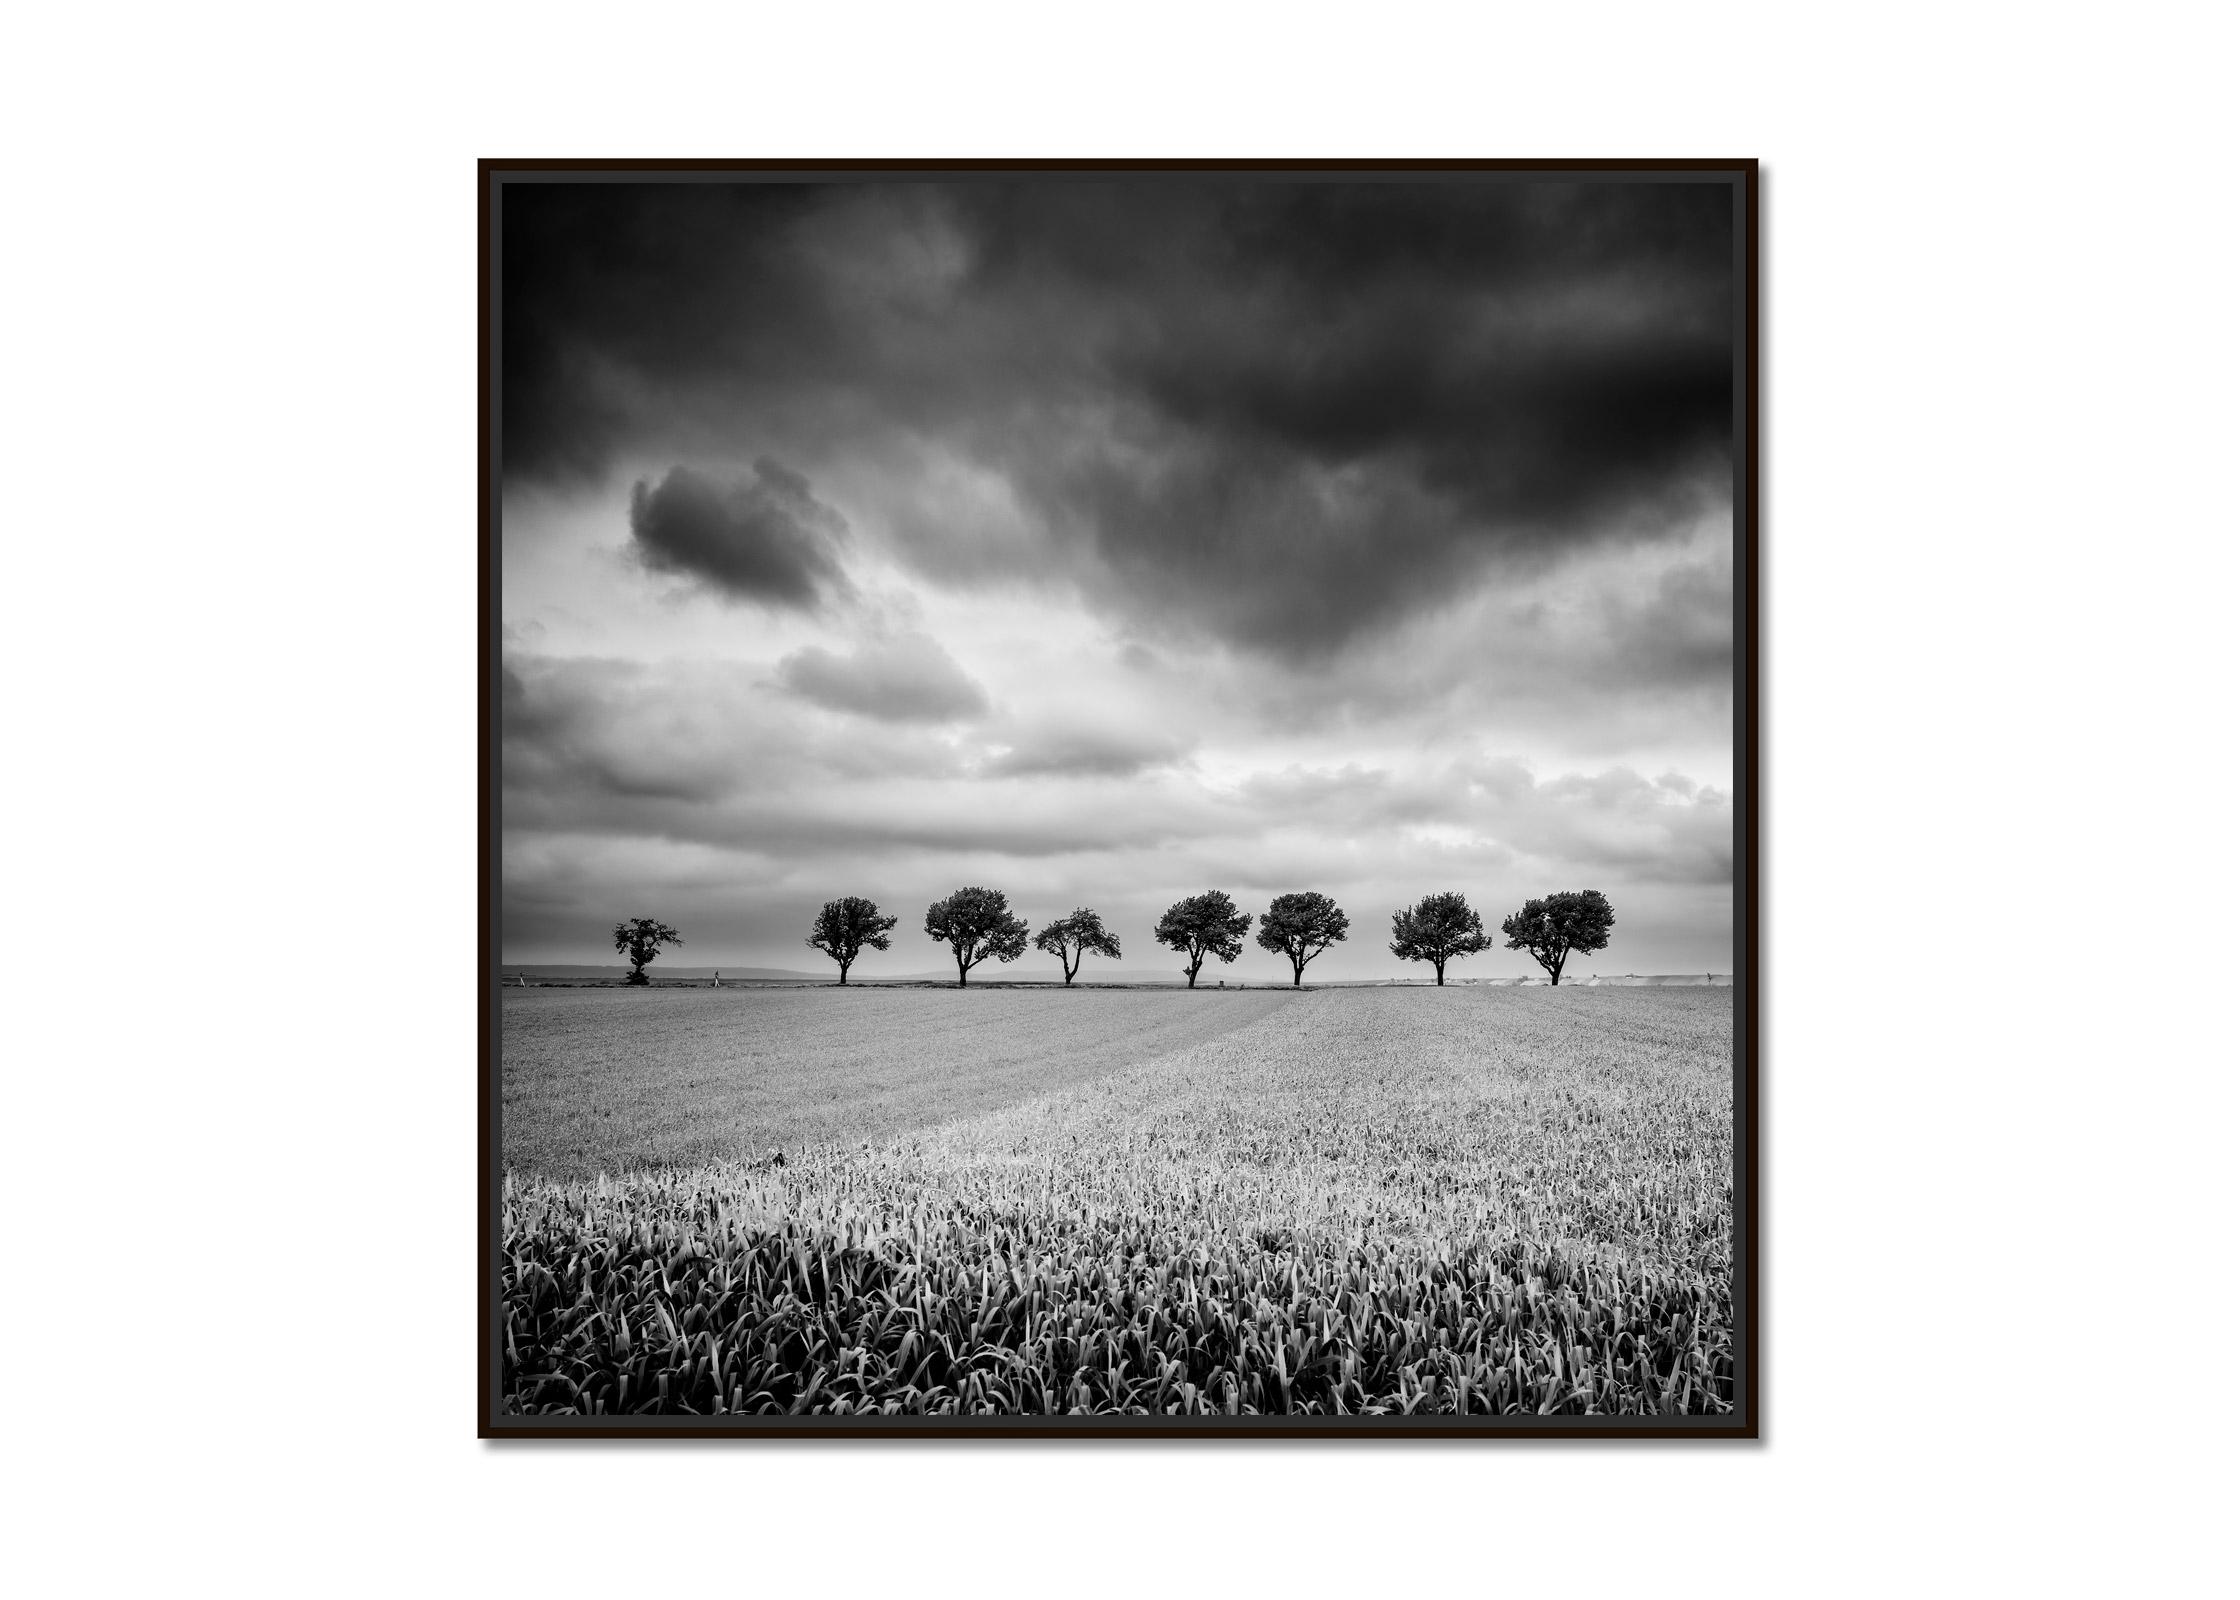 Eleven Cherry Trees, stormy Clouds, black and white, landscape, art photography - Print by Gerald Berghammer